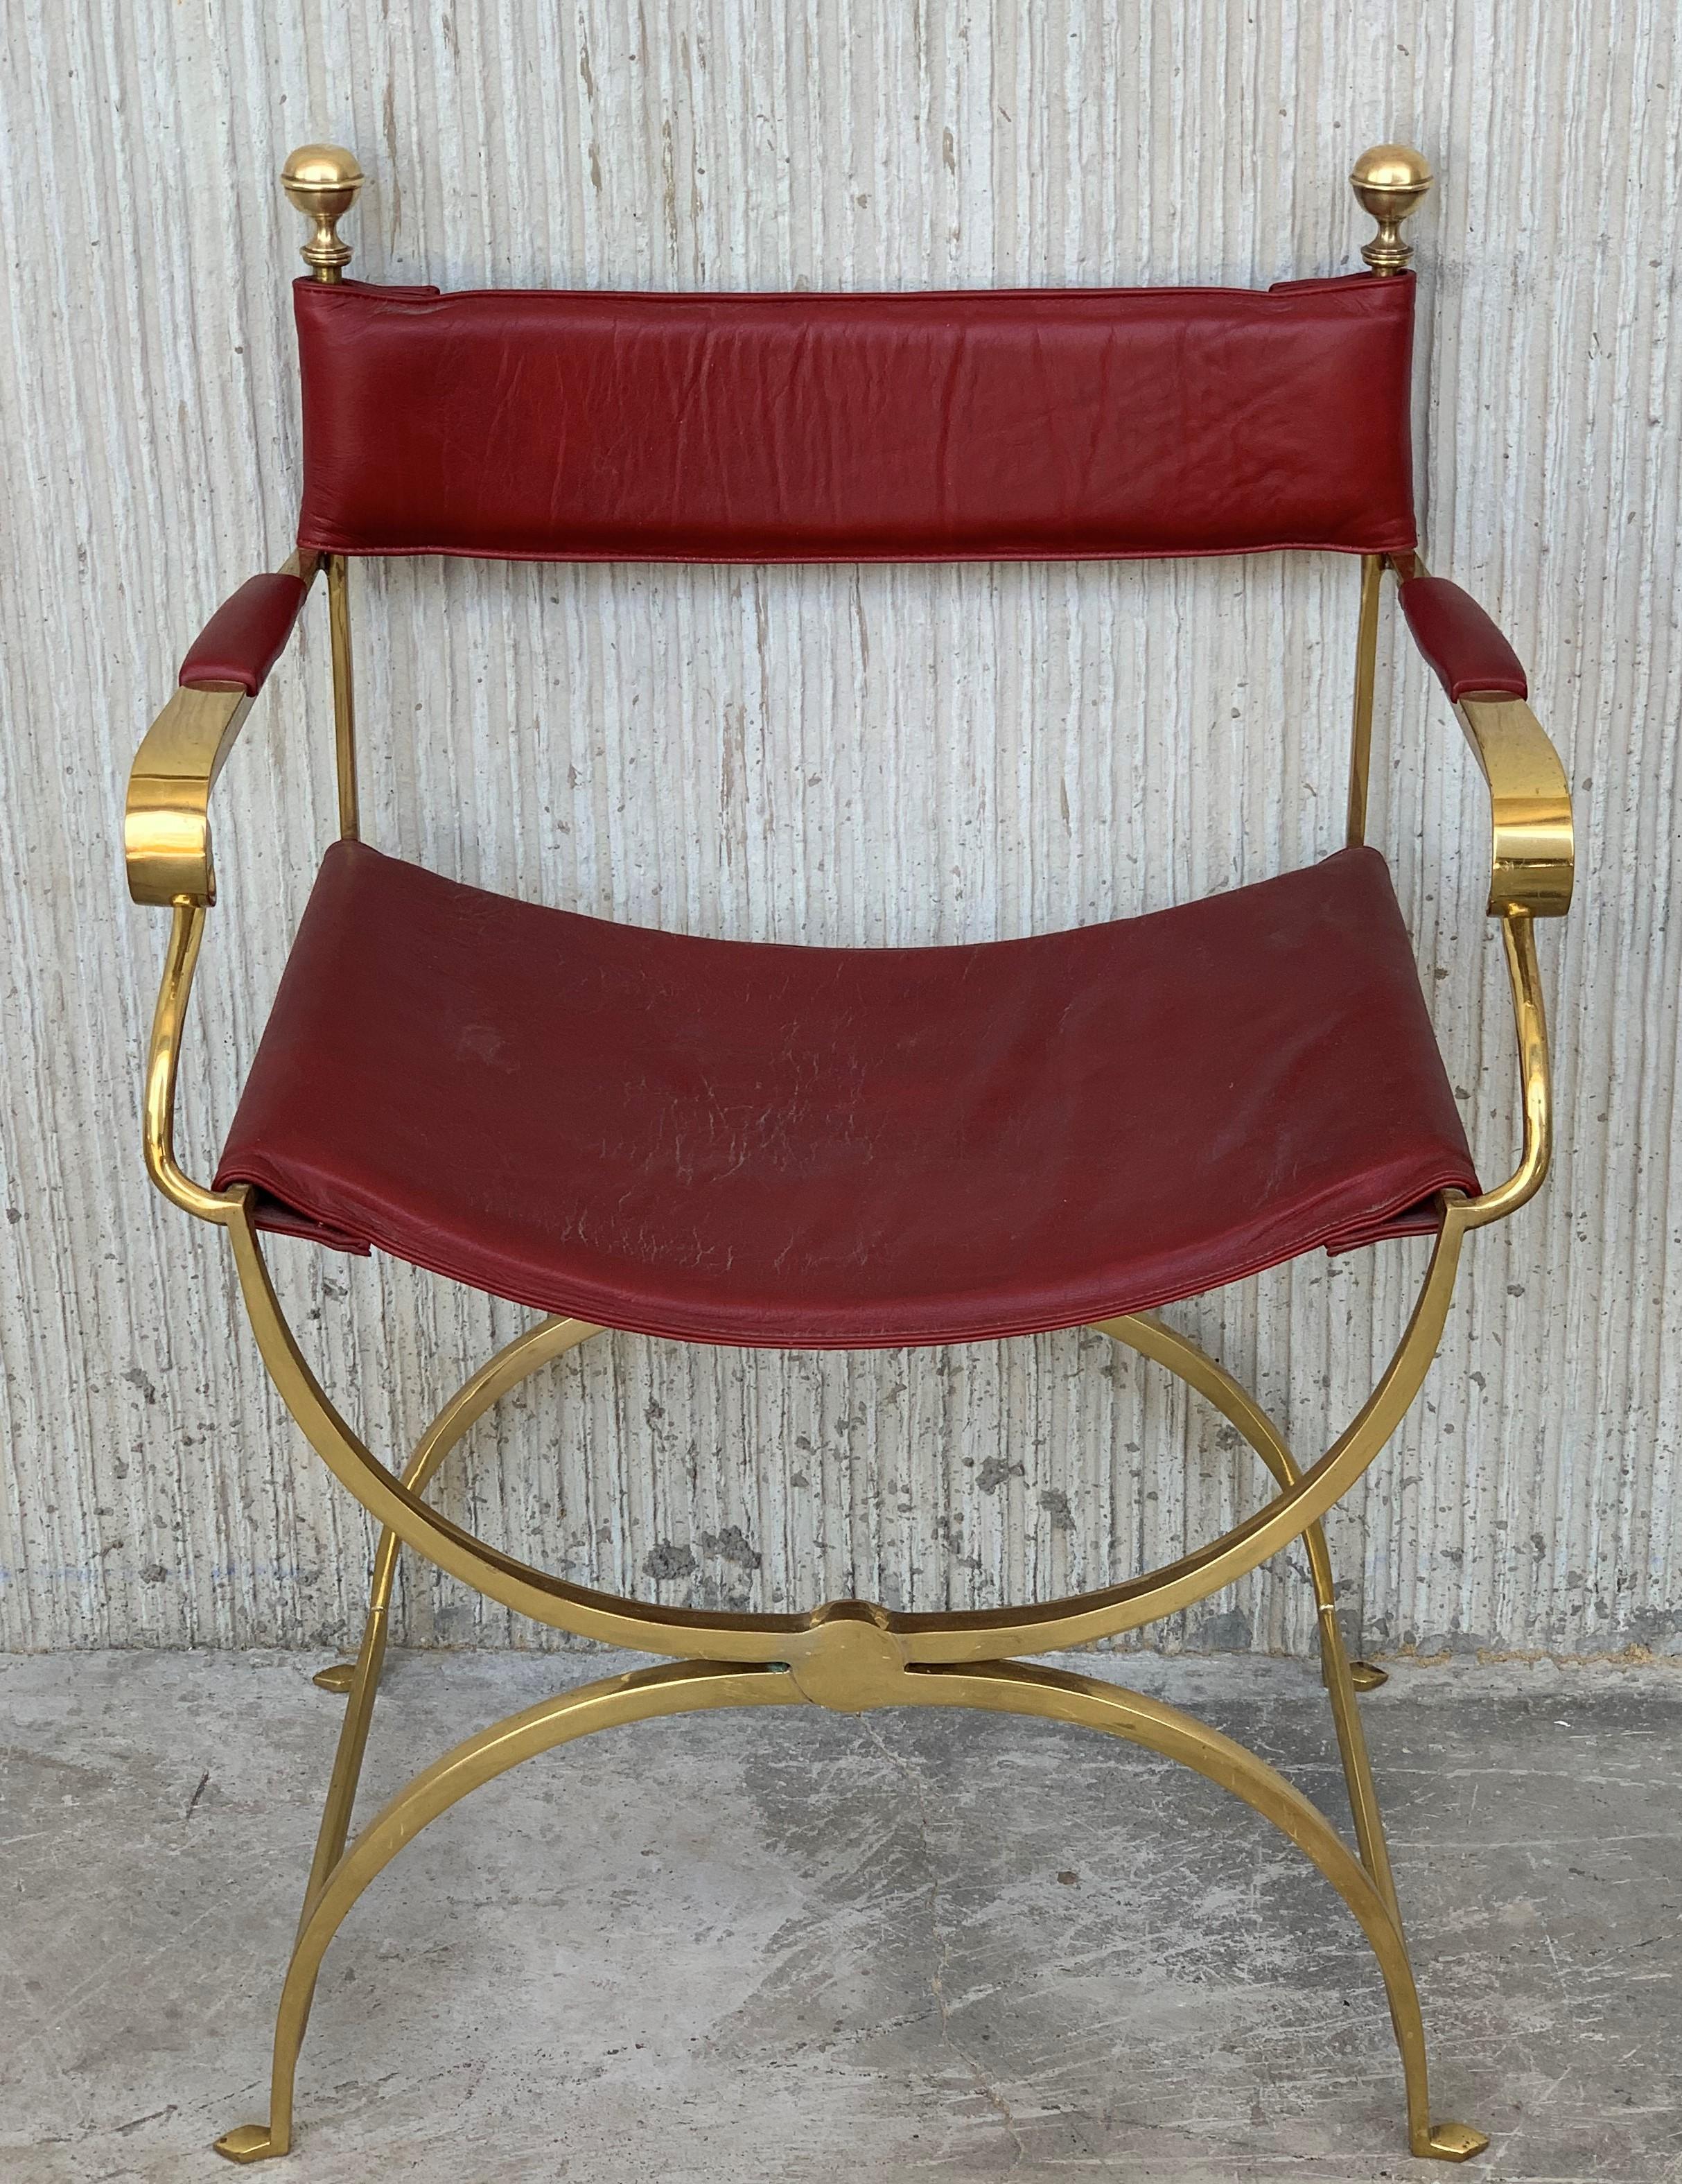 Pair of beautiful 1980s Italian chrome gold and red leather Savonarola director's chair in perfect conditions, with very minor fading and great timeless patina.
Very comfortable armchair, quilted in back and seat.
Size: Height to the arm